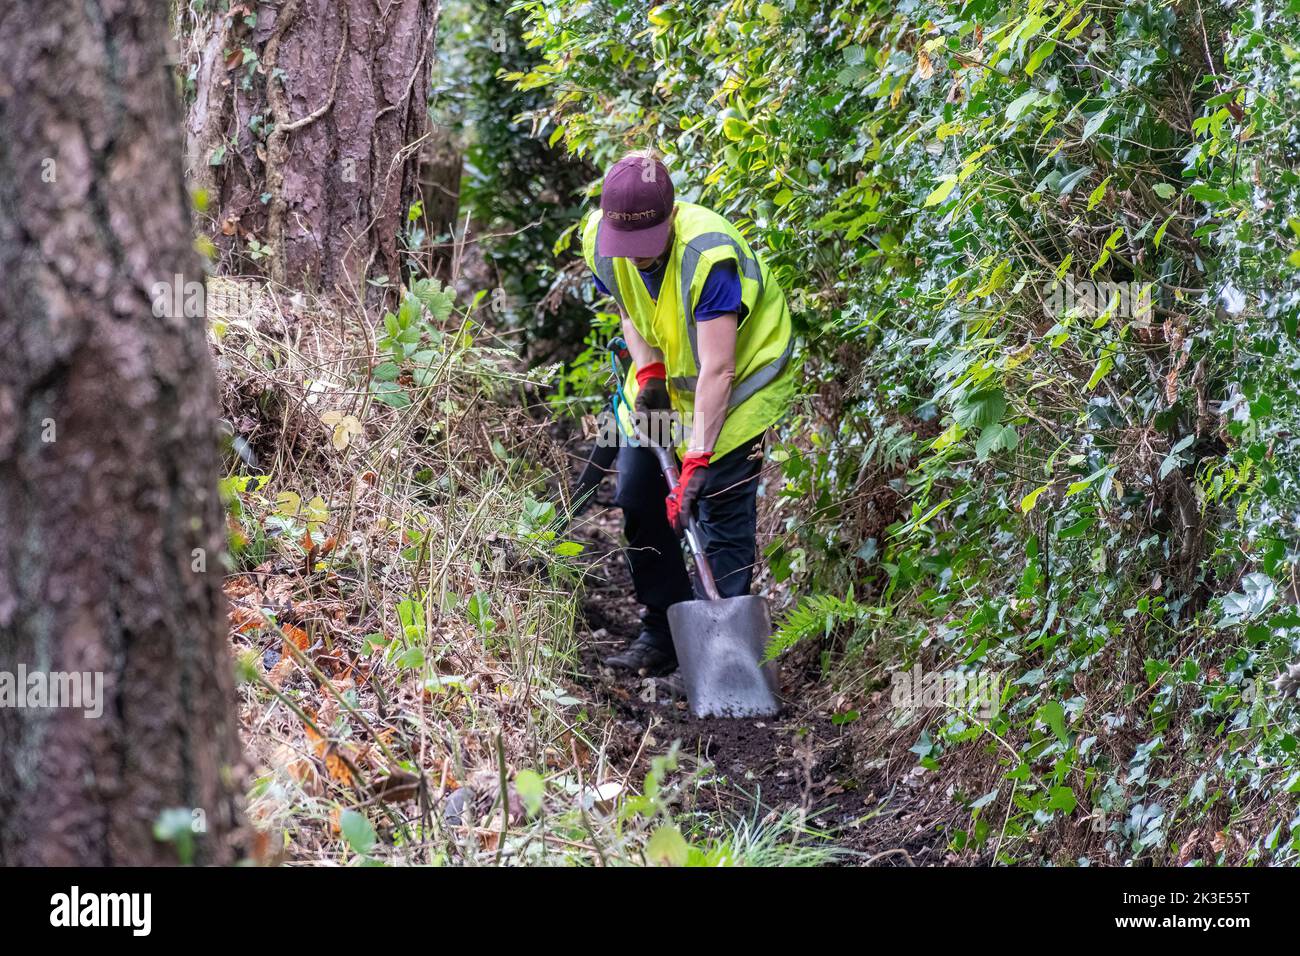 Person clearing leaves and debris out of a ditch by hand with a shovel, preventing flooding, UK, during autumn Stock Photo